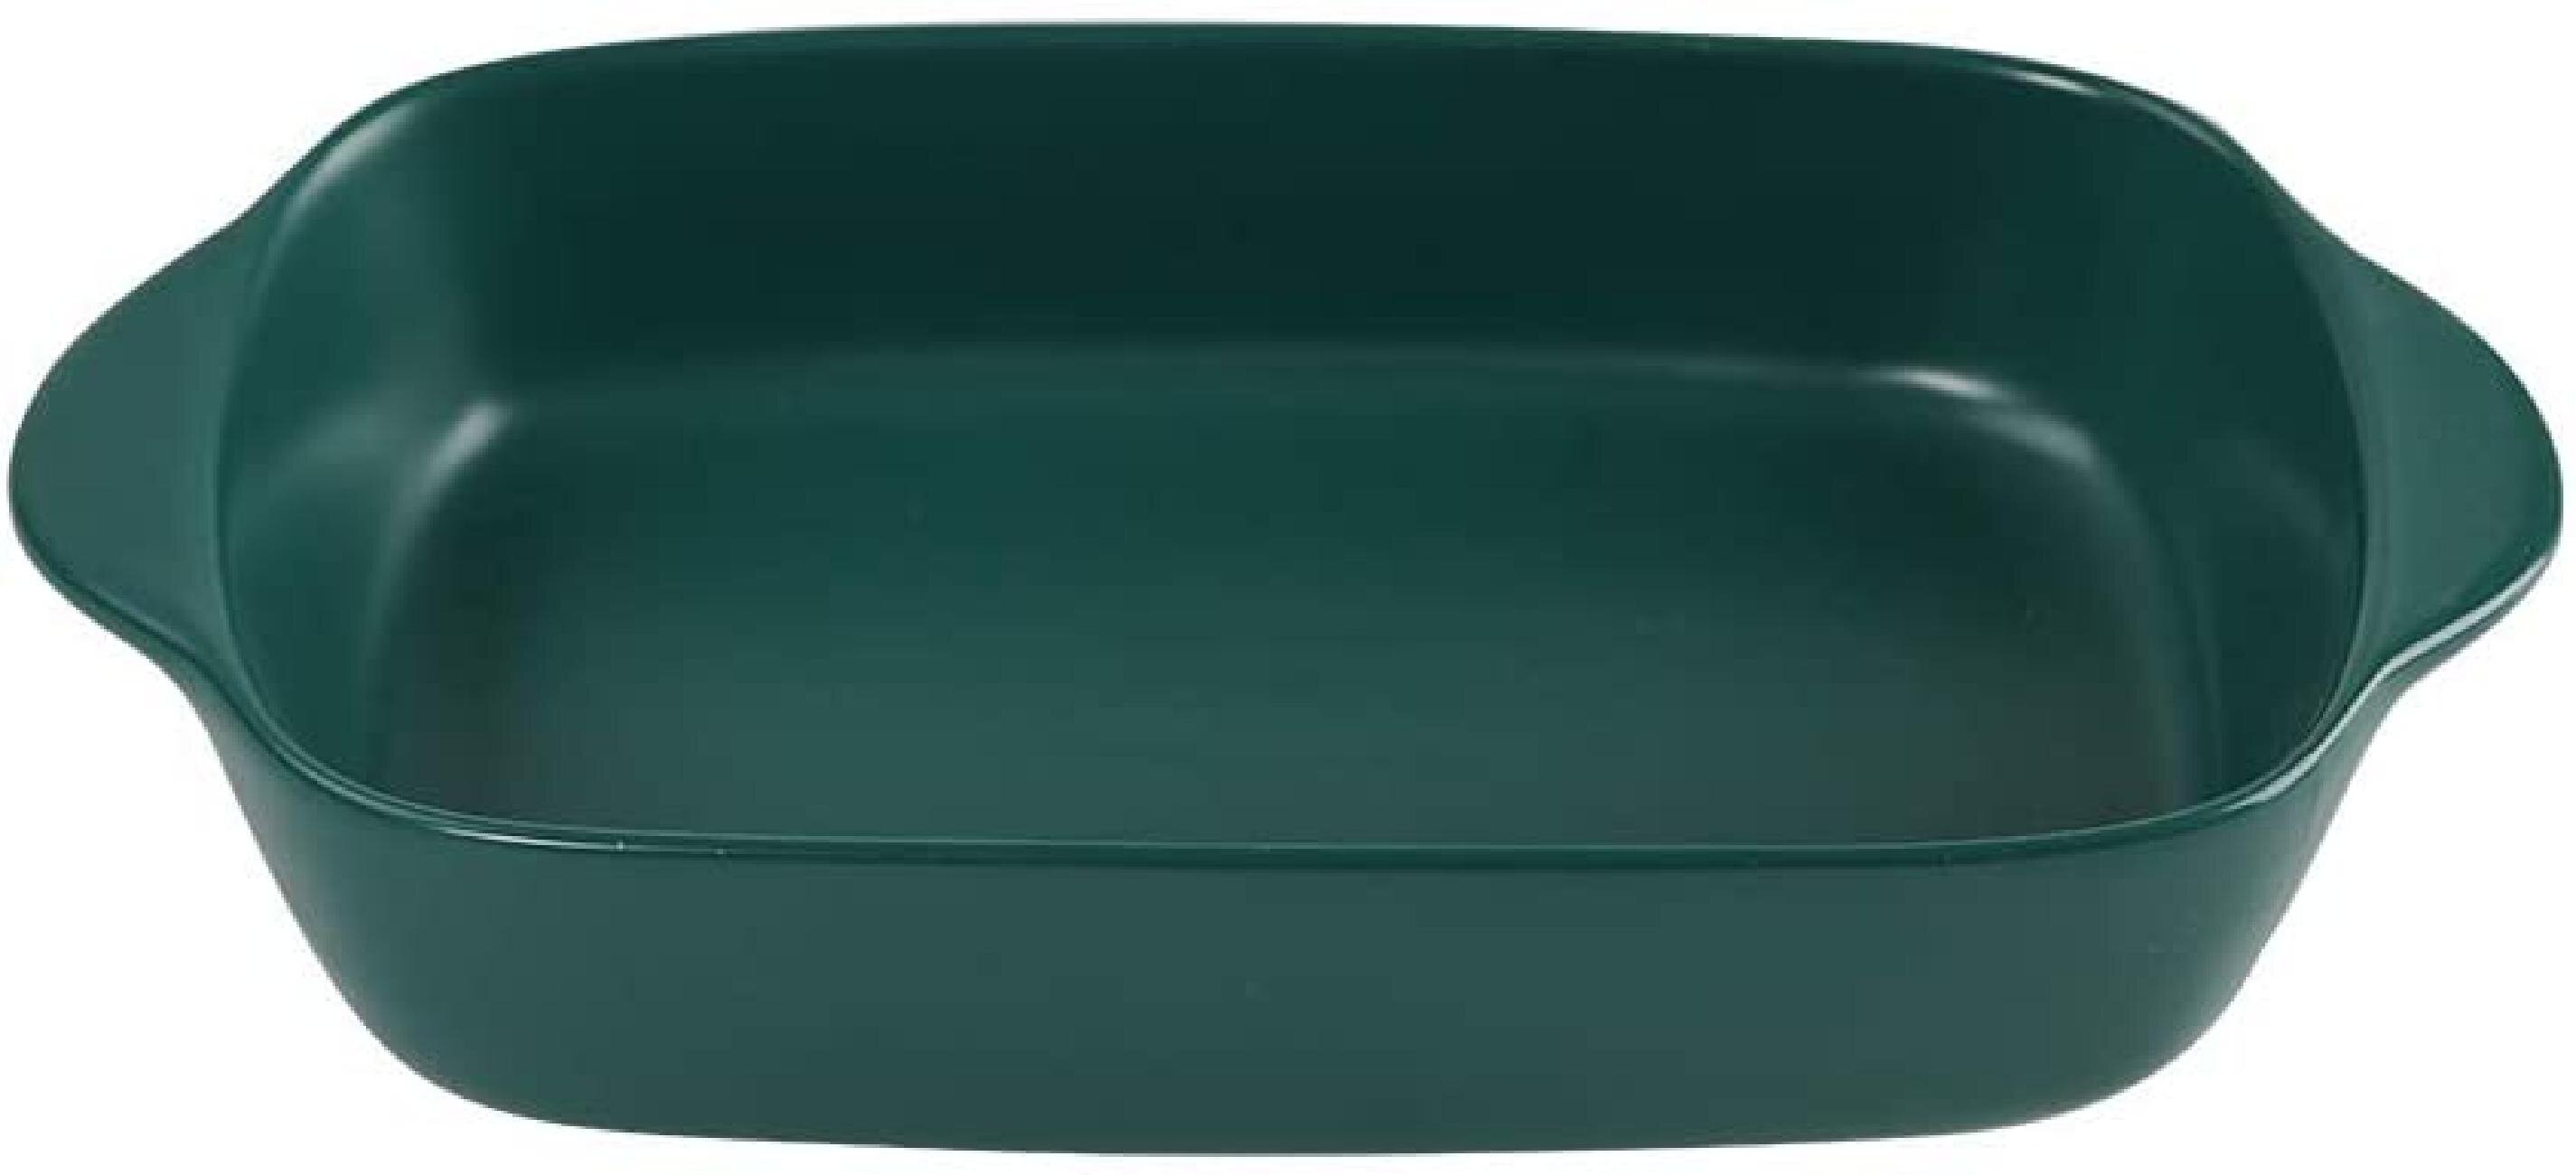 Lasagna SWEEJAR Ceramic Baking Dish Turquoise Family Dinner 9 Inches Cake Baking Pan for Brownie Porcelain Round Bakeware with Double Handle for Casserole 